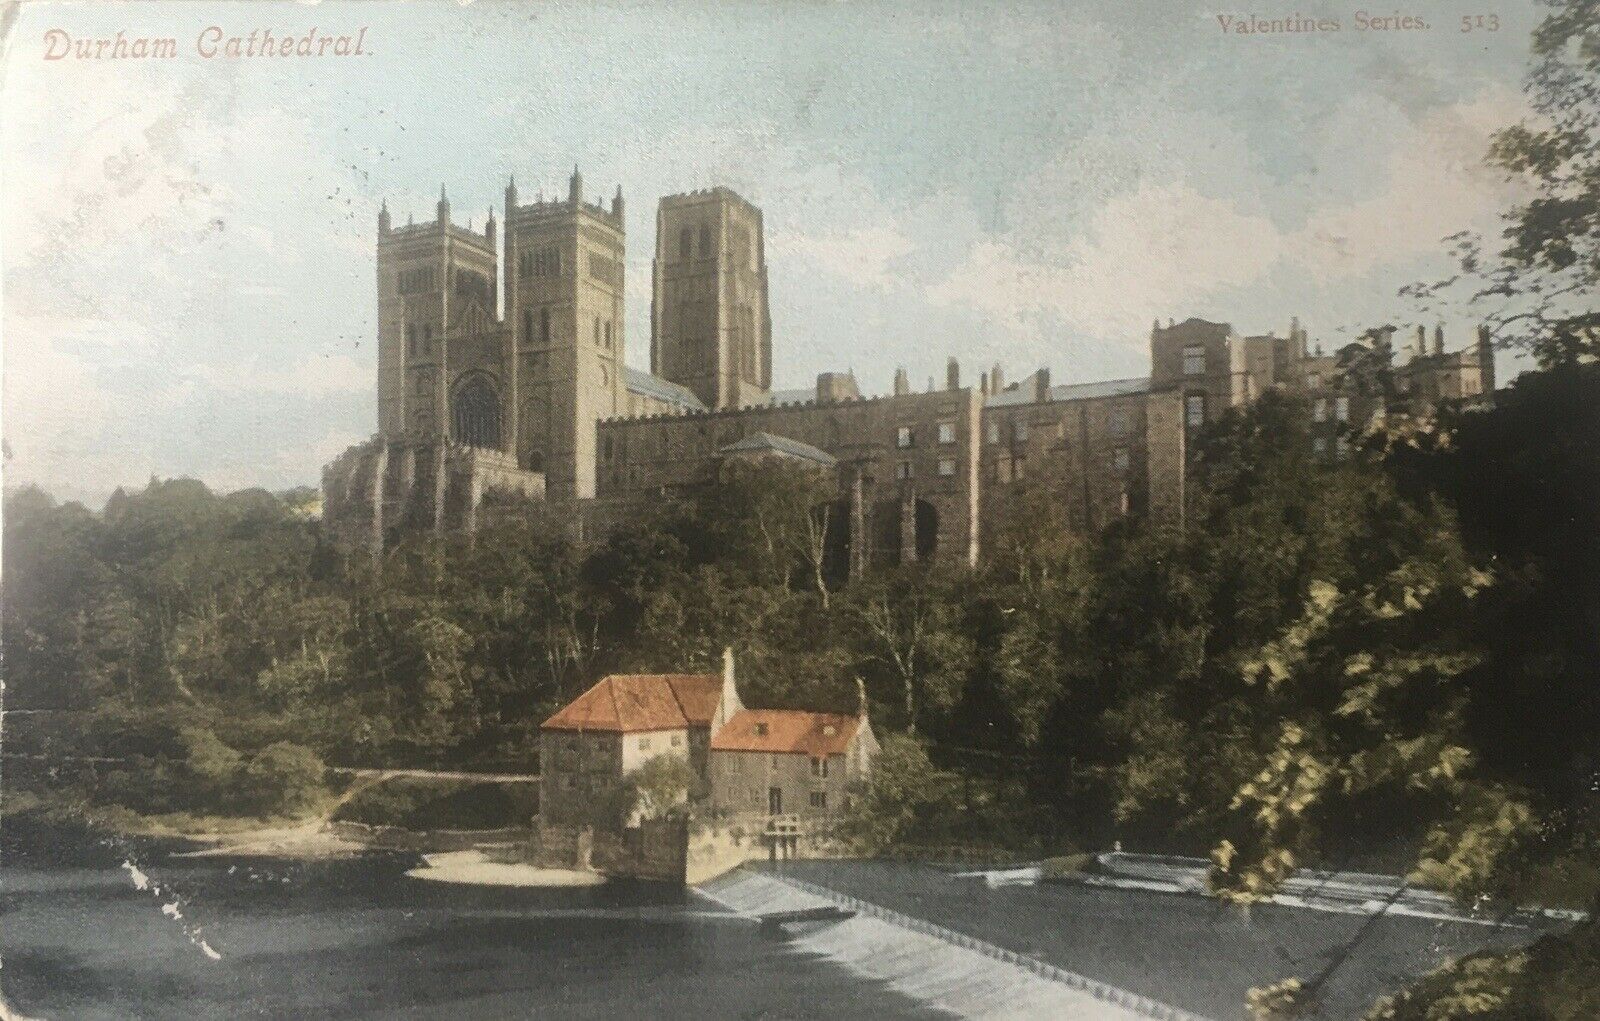 House Clearance - Durham Cathedral franked 1903 ,Early Rare Valentine Series. Usual Wear